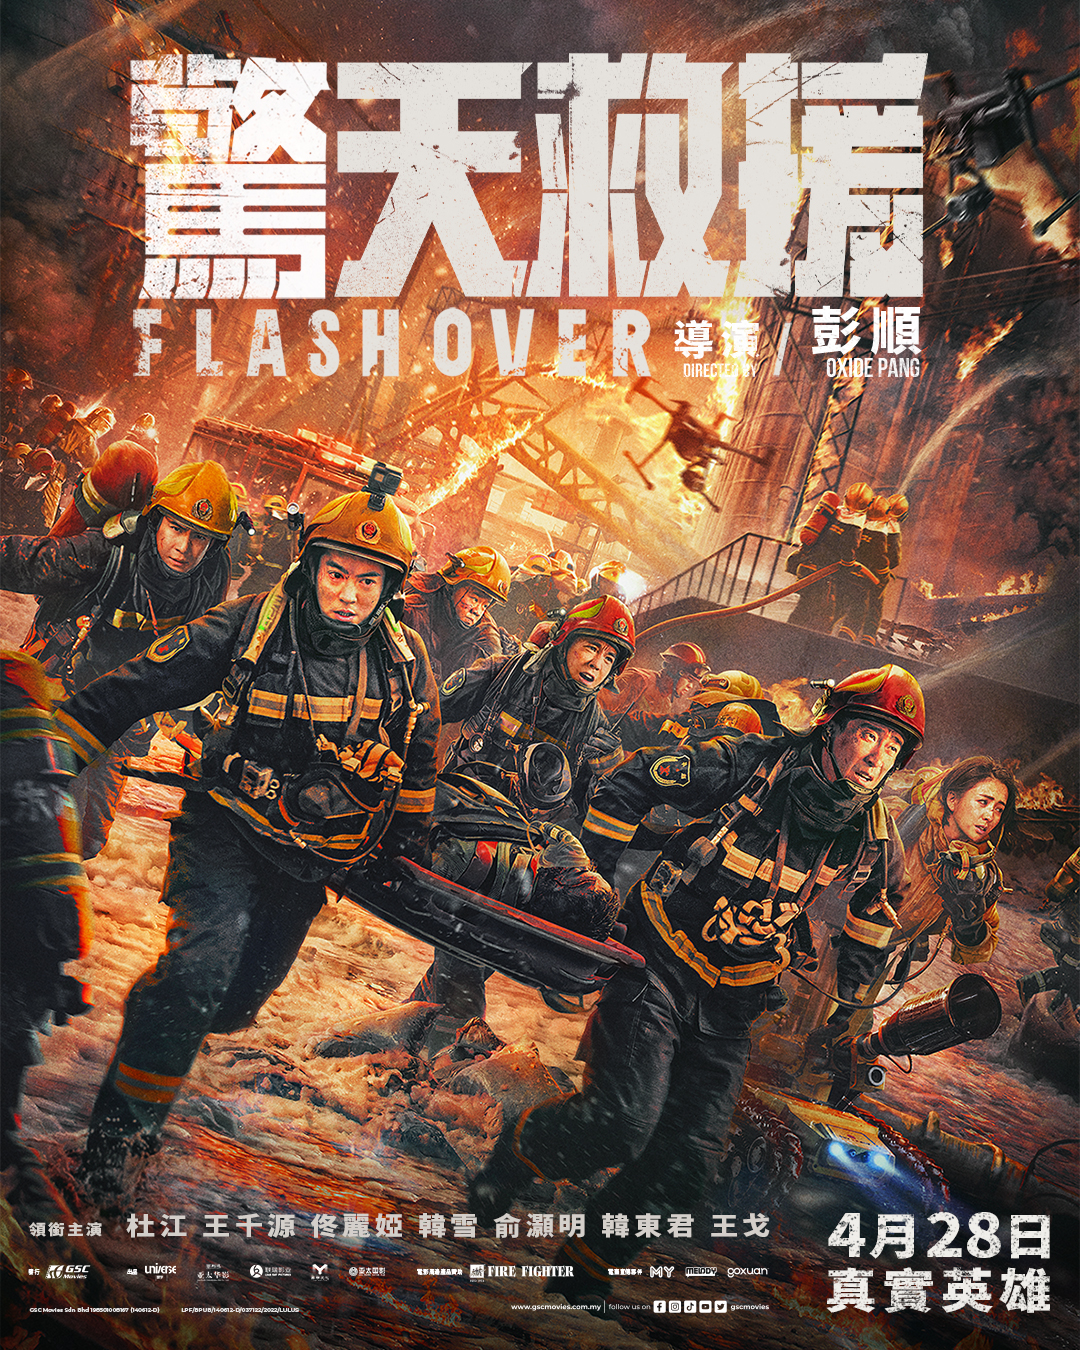 Flash over: an explosive movie of bravery and teamwork set to ignite malaysian screens | weirdkaya